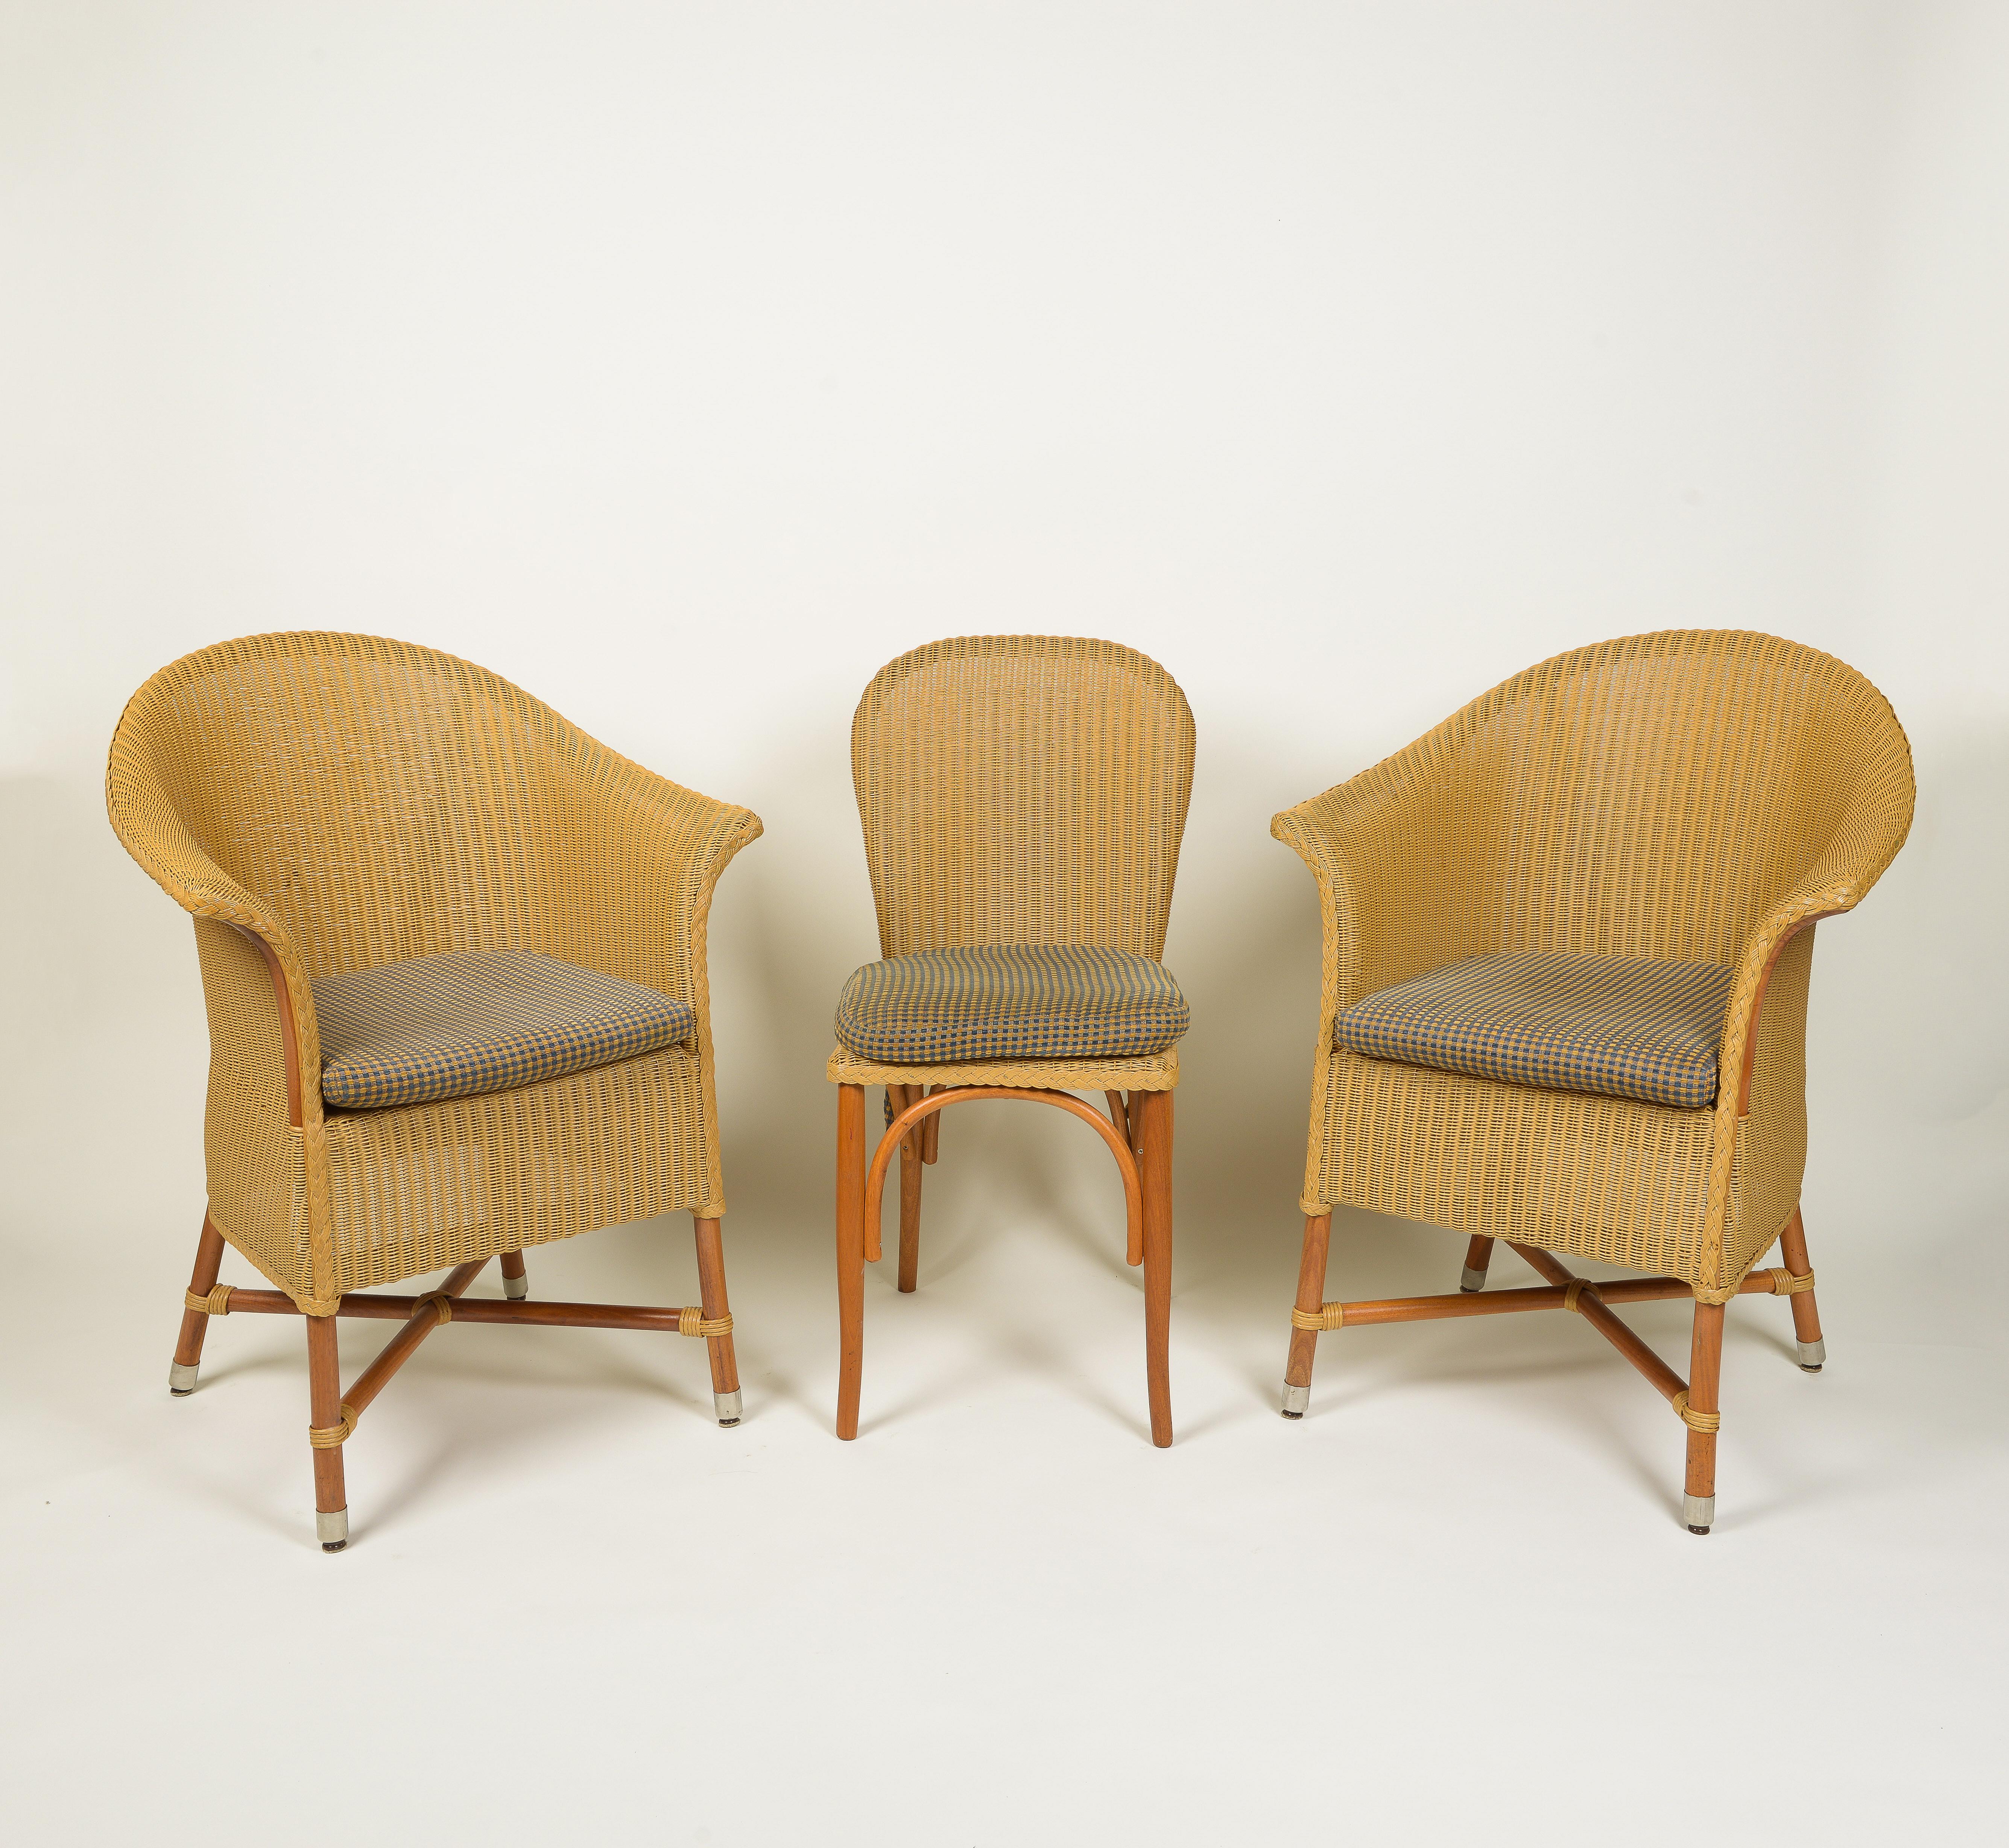 Comprising four armchairs and two side chairs; each with custom blue and brown checked chenille seat cushions; bearing metal label Lloyd Loom Italia.

Dimensions:
Chairs with Arms: Height: 35.25 x Width: 27 x Depth: 22.75 x Seat Height: 18 inches